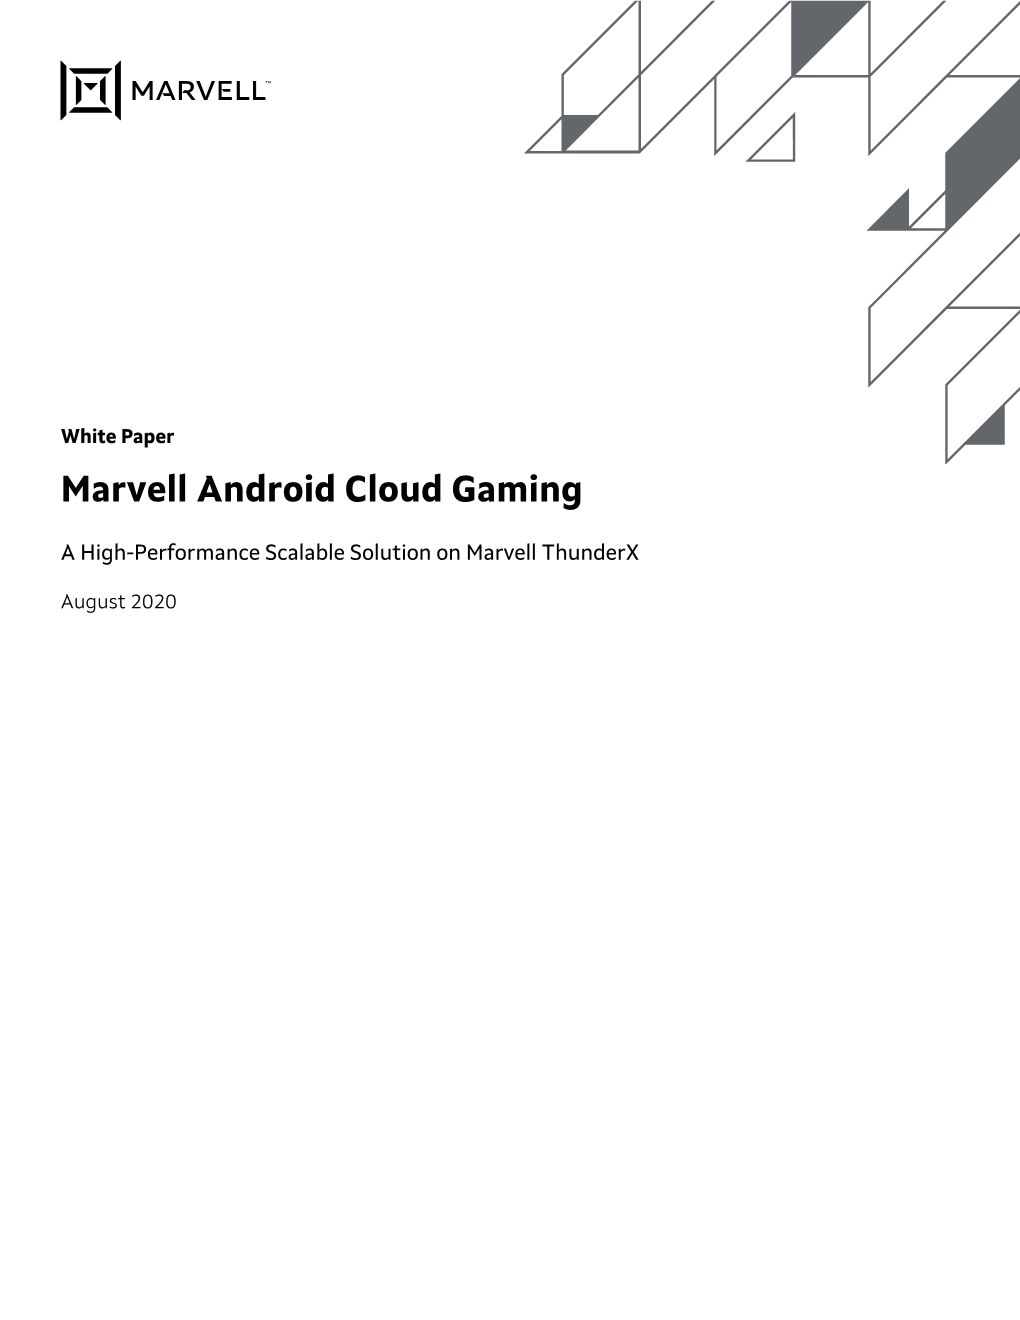 Marvell Android Cloud Gaming